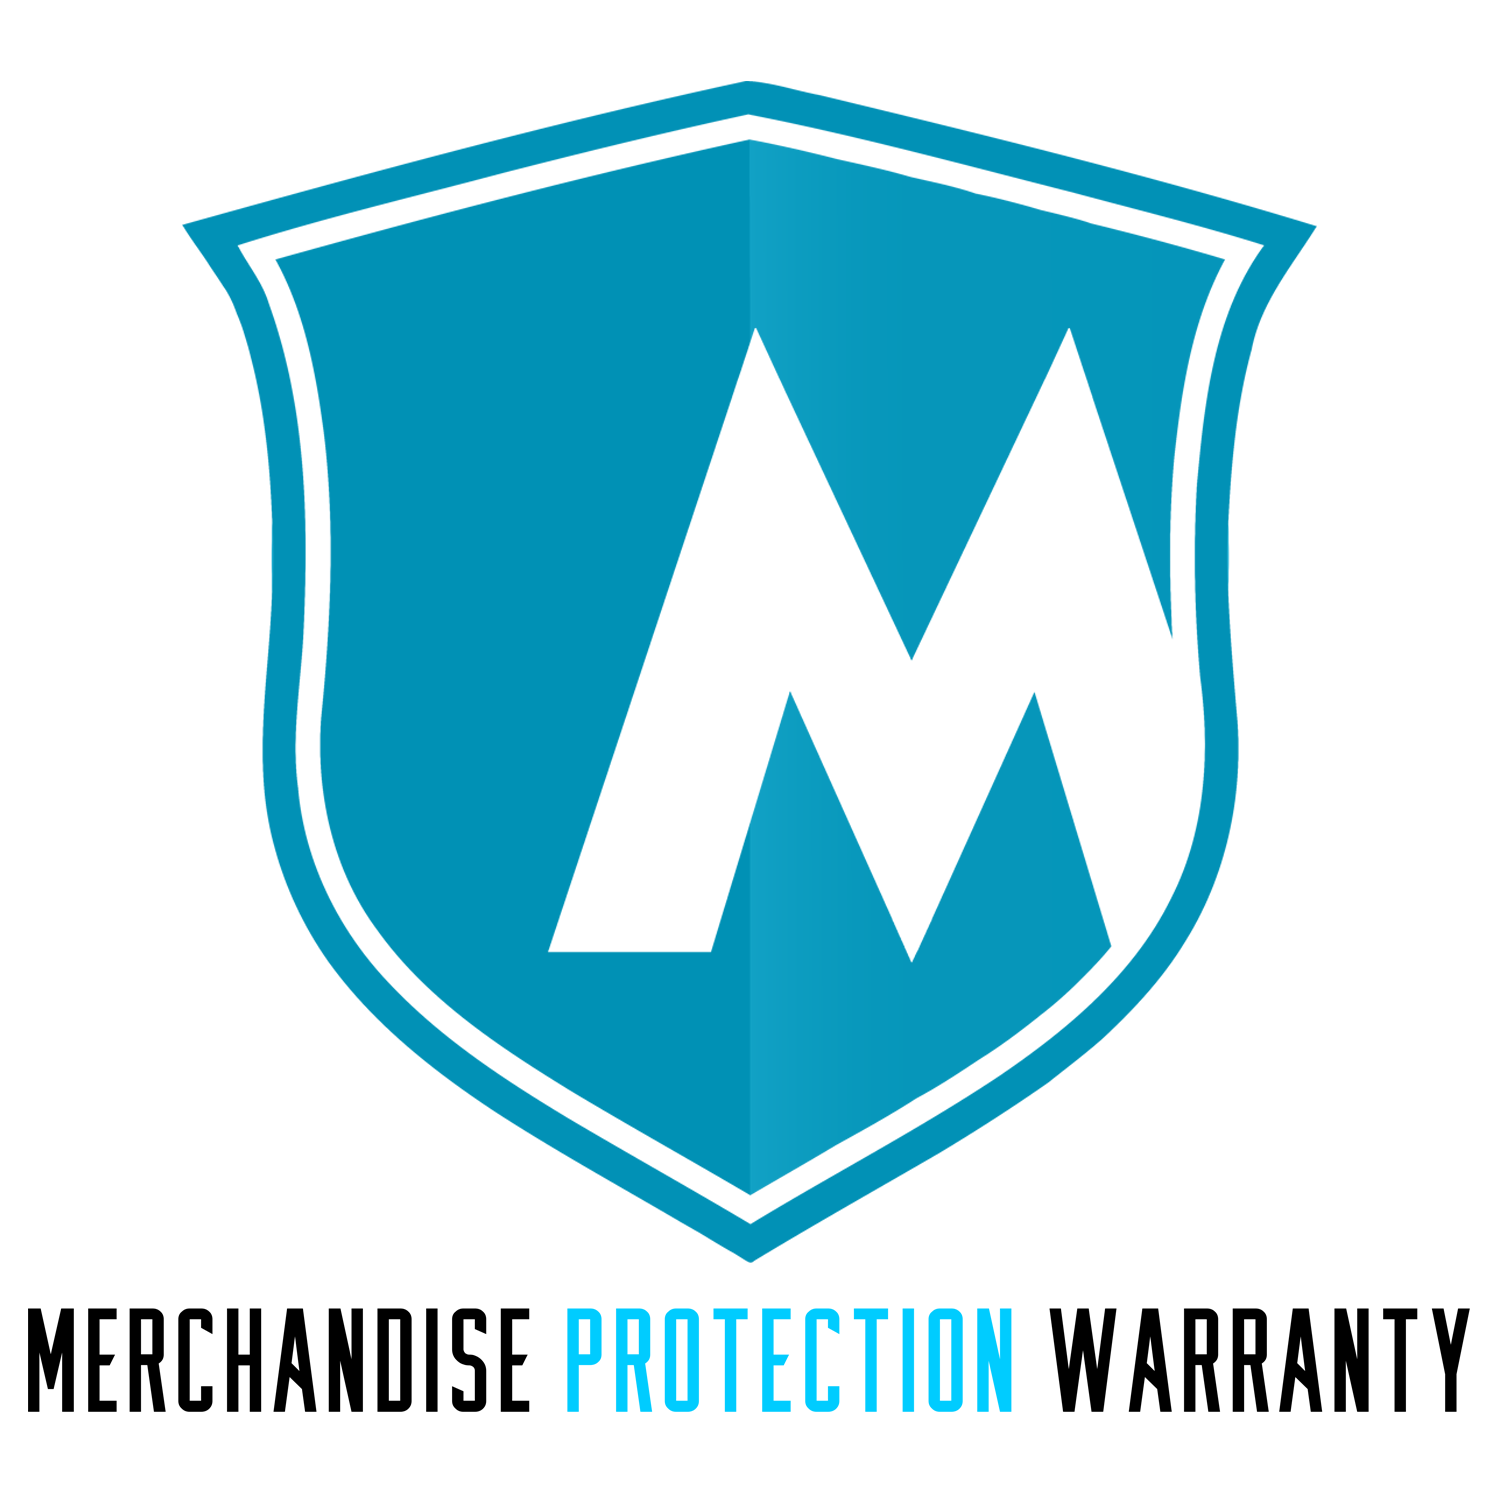 2 Year Merchandise Protection Warranty under $5000 (Accidental, Prepaid Shipping)